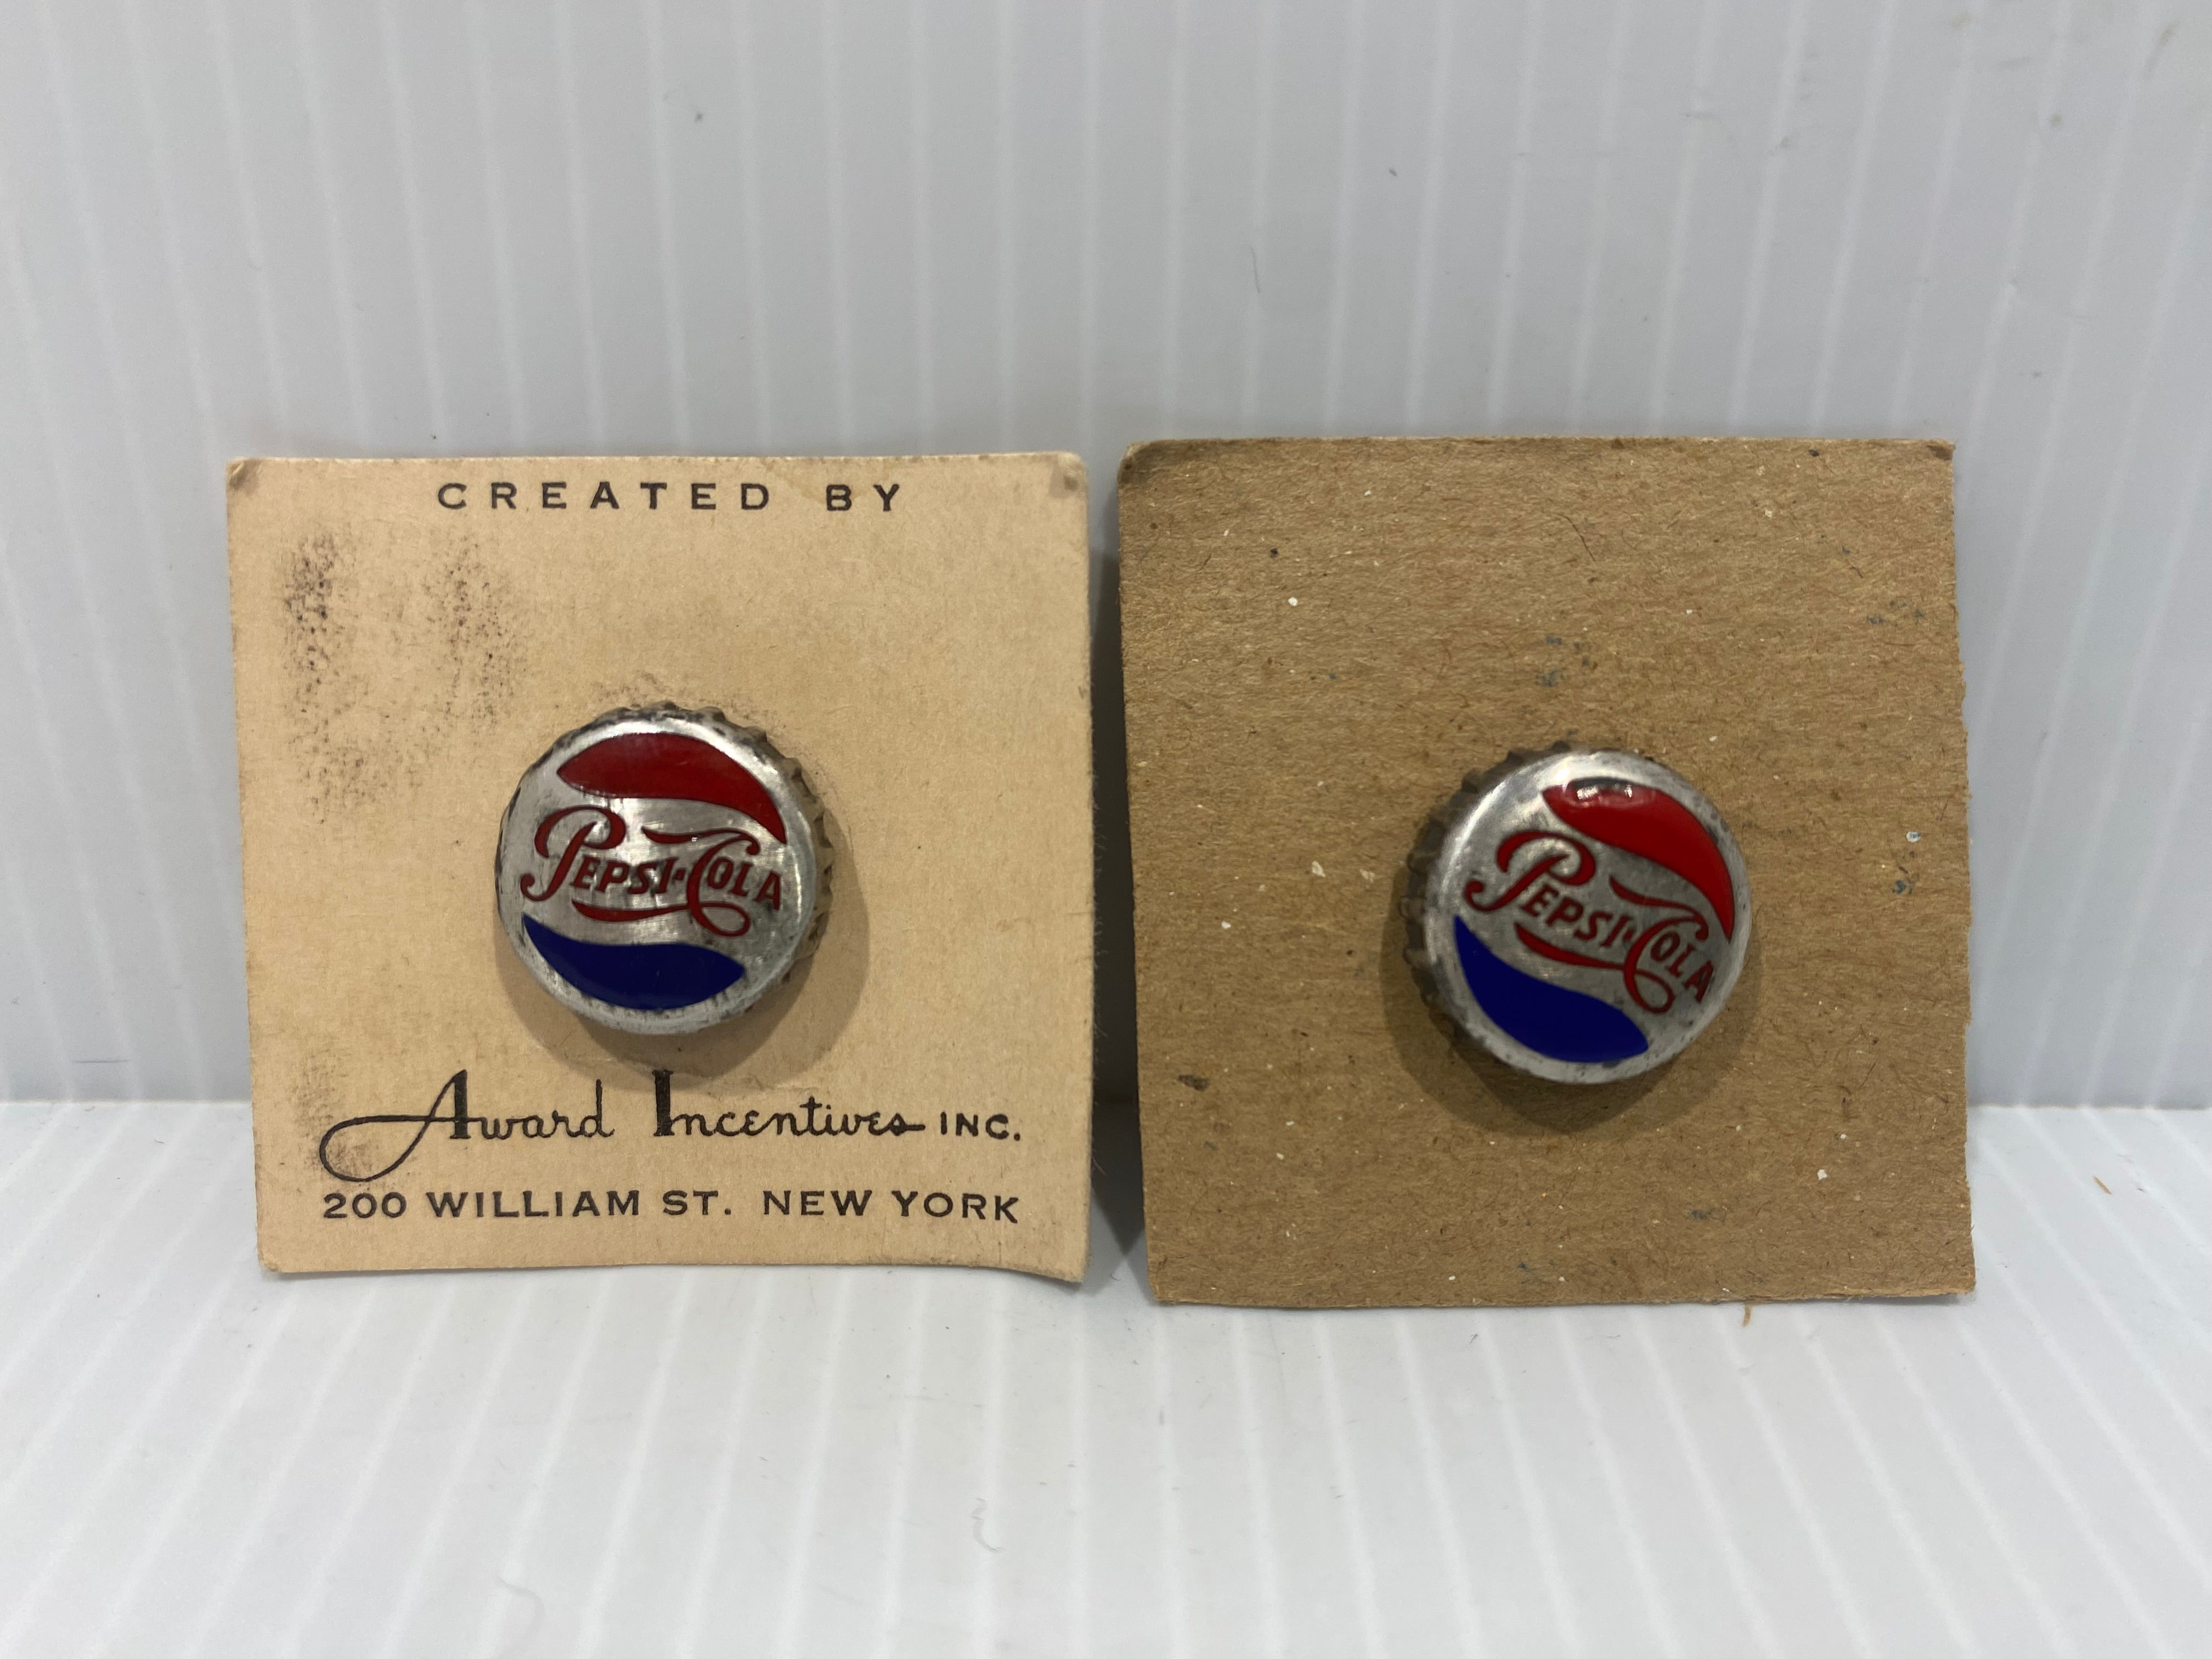 vintage silver pins, advertising for Pepsi Cola.